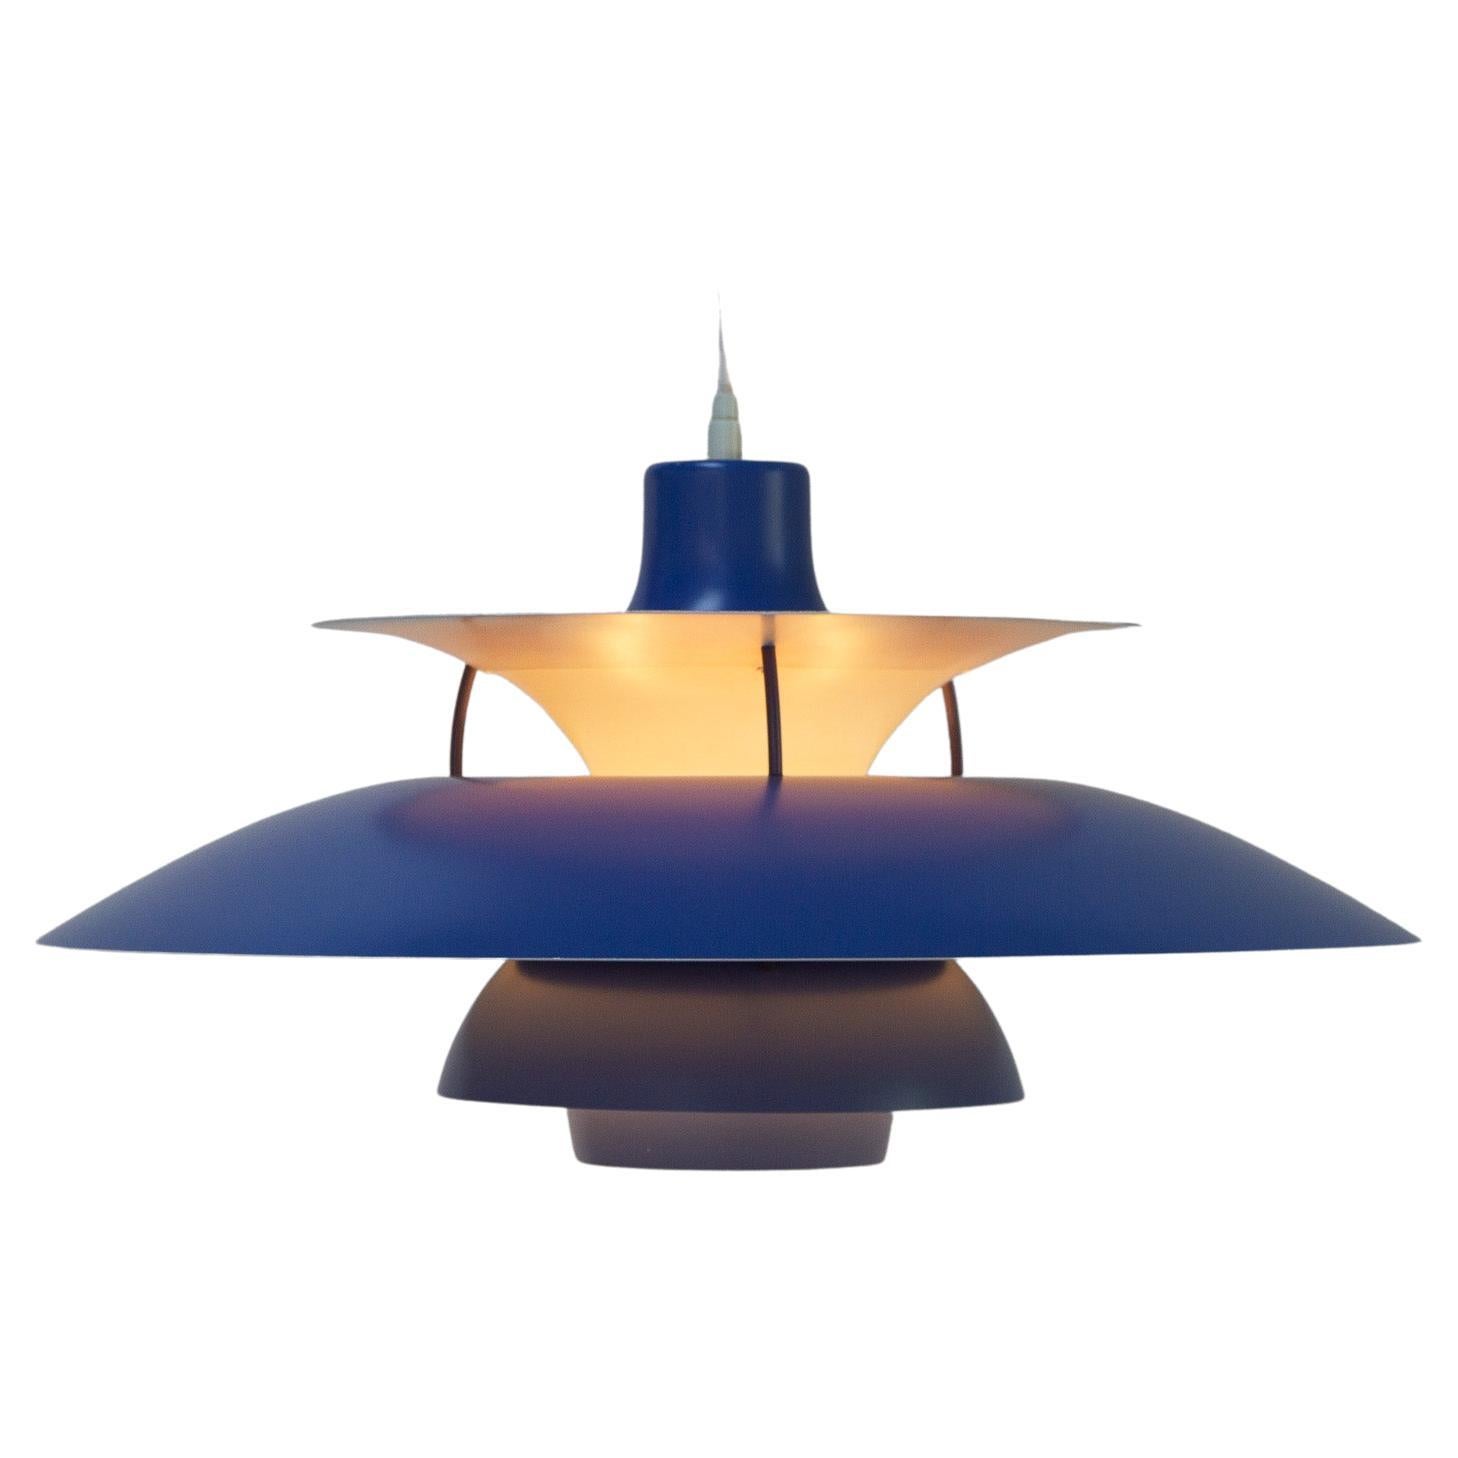 Danish Vintage blue ceiling pendant PH5 by Poul Henningsen, 1960s.
Iconic Danish lighting designed in 1958 by Poul Henningsen for Louis Poulsen. This model is known as PH 5 because it has five individual shades. Emits a soft light outwards and